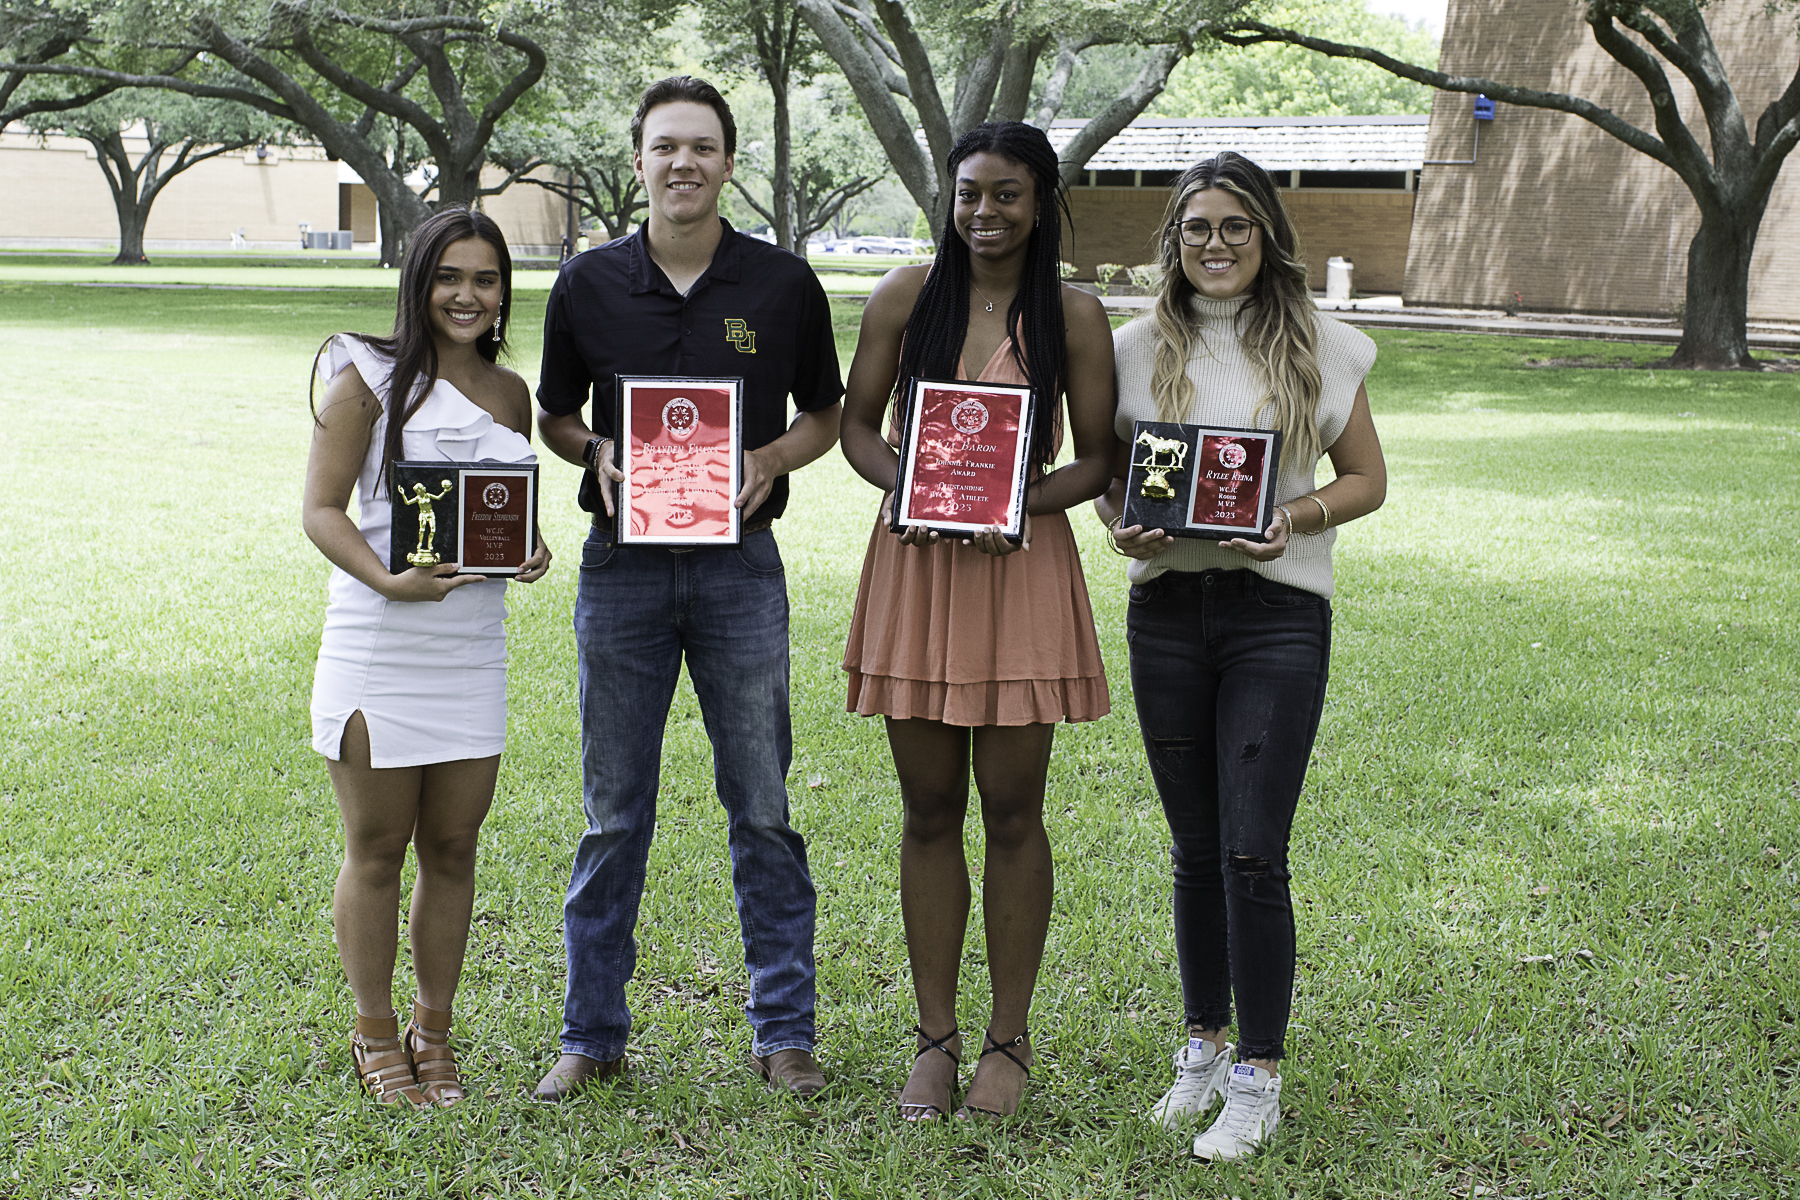 BASEBALL, RODEO AND VOLLEYBALL TEAM ATHLETES RECEIVE AWARDS